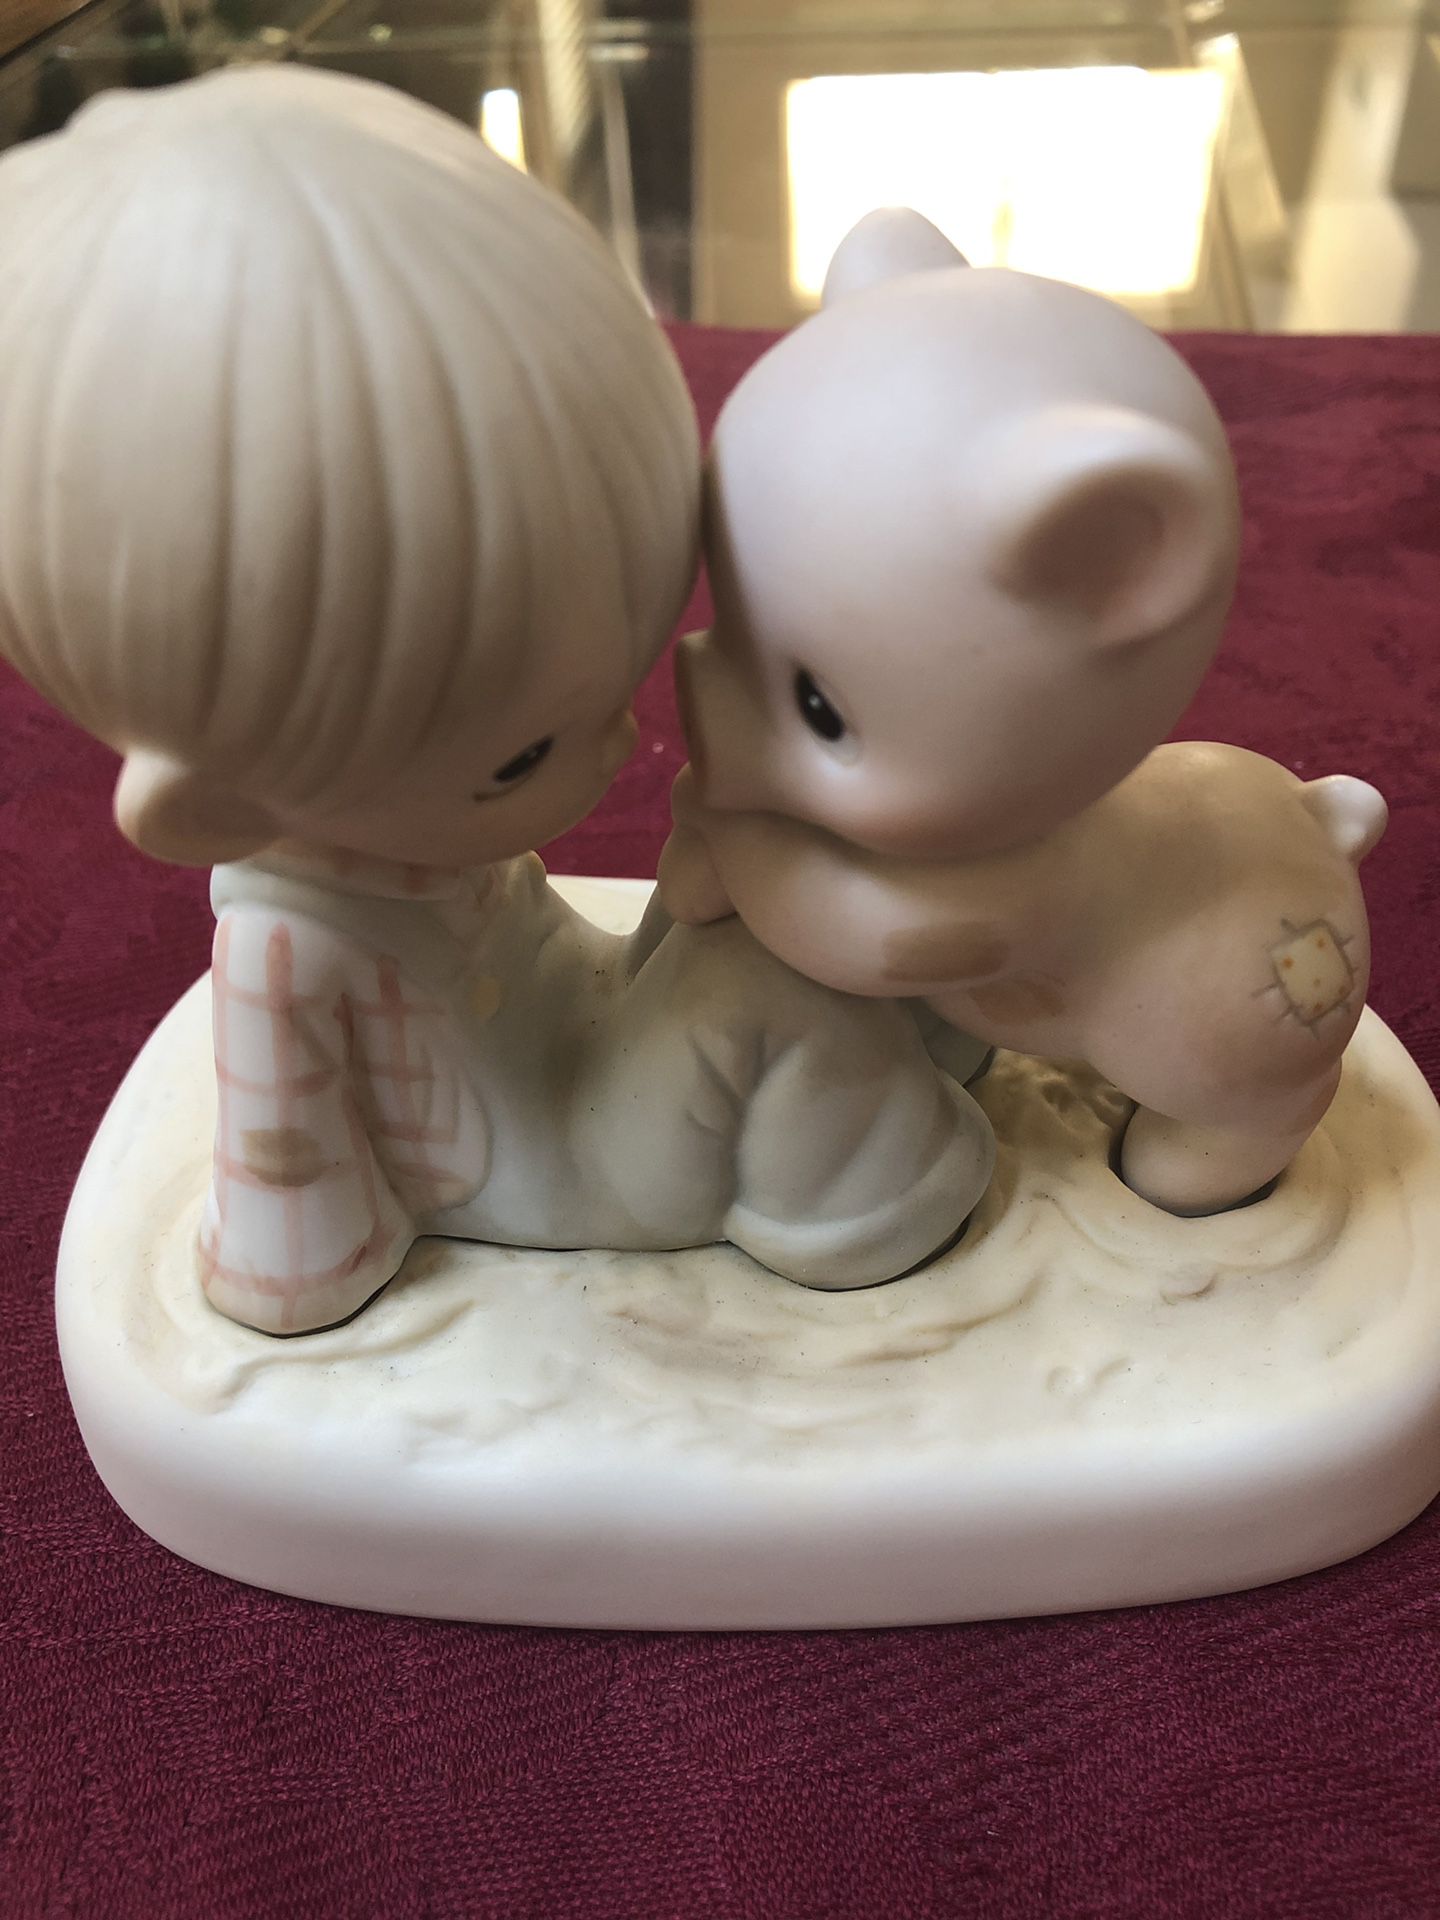 Precious Moments figurine “we’re in it together “